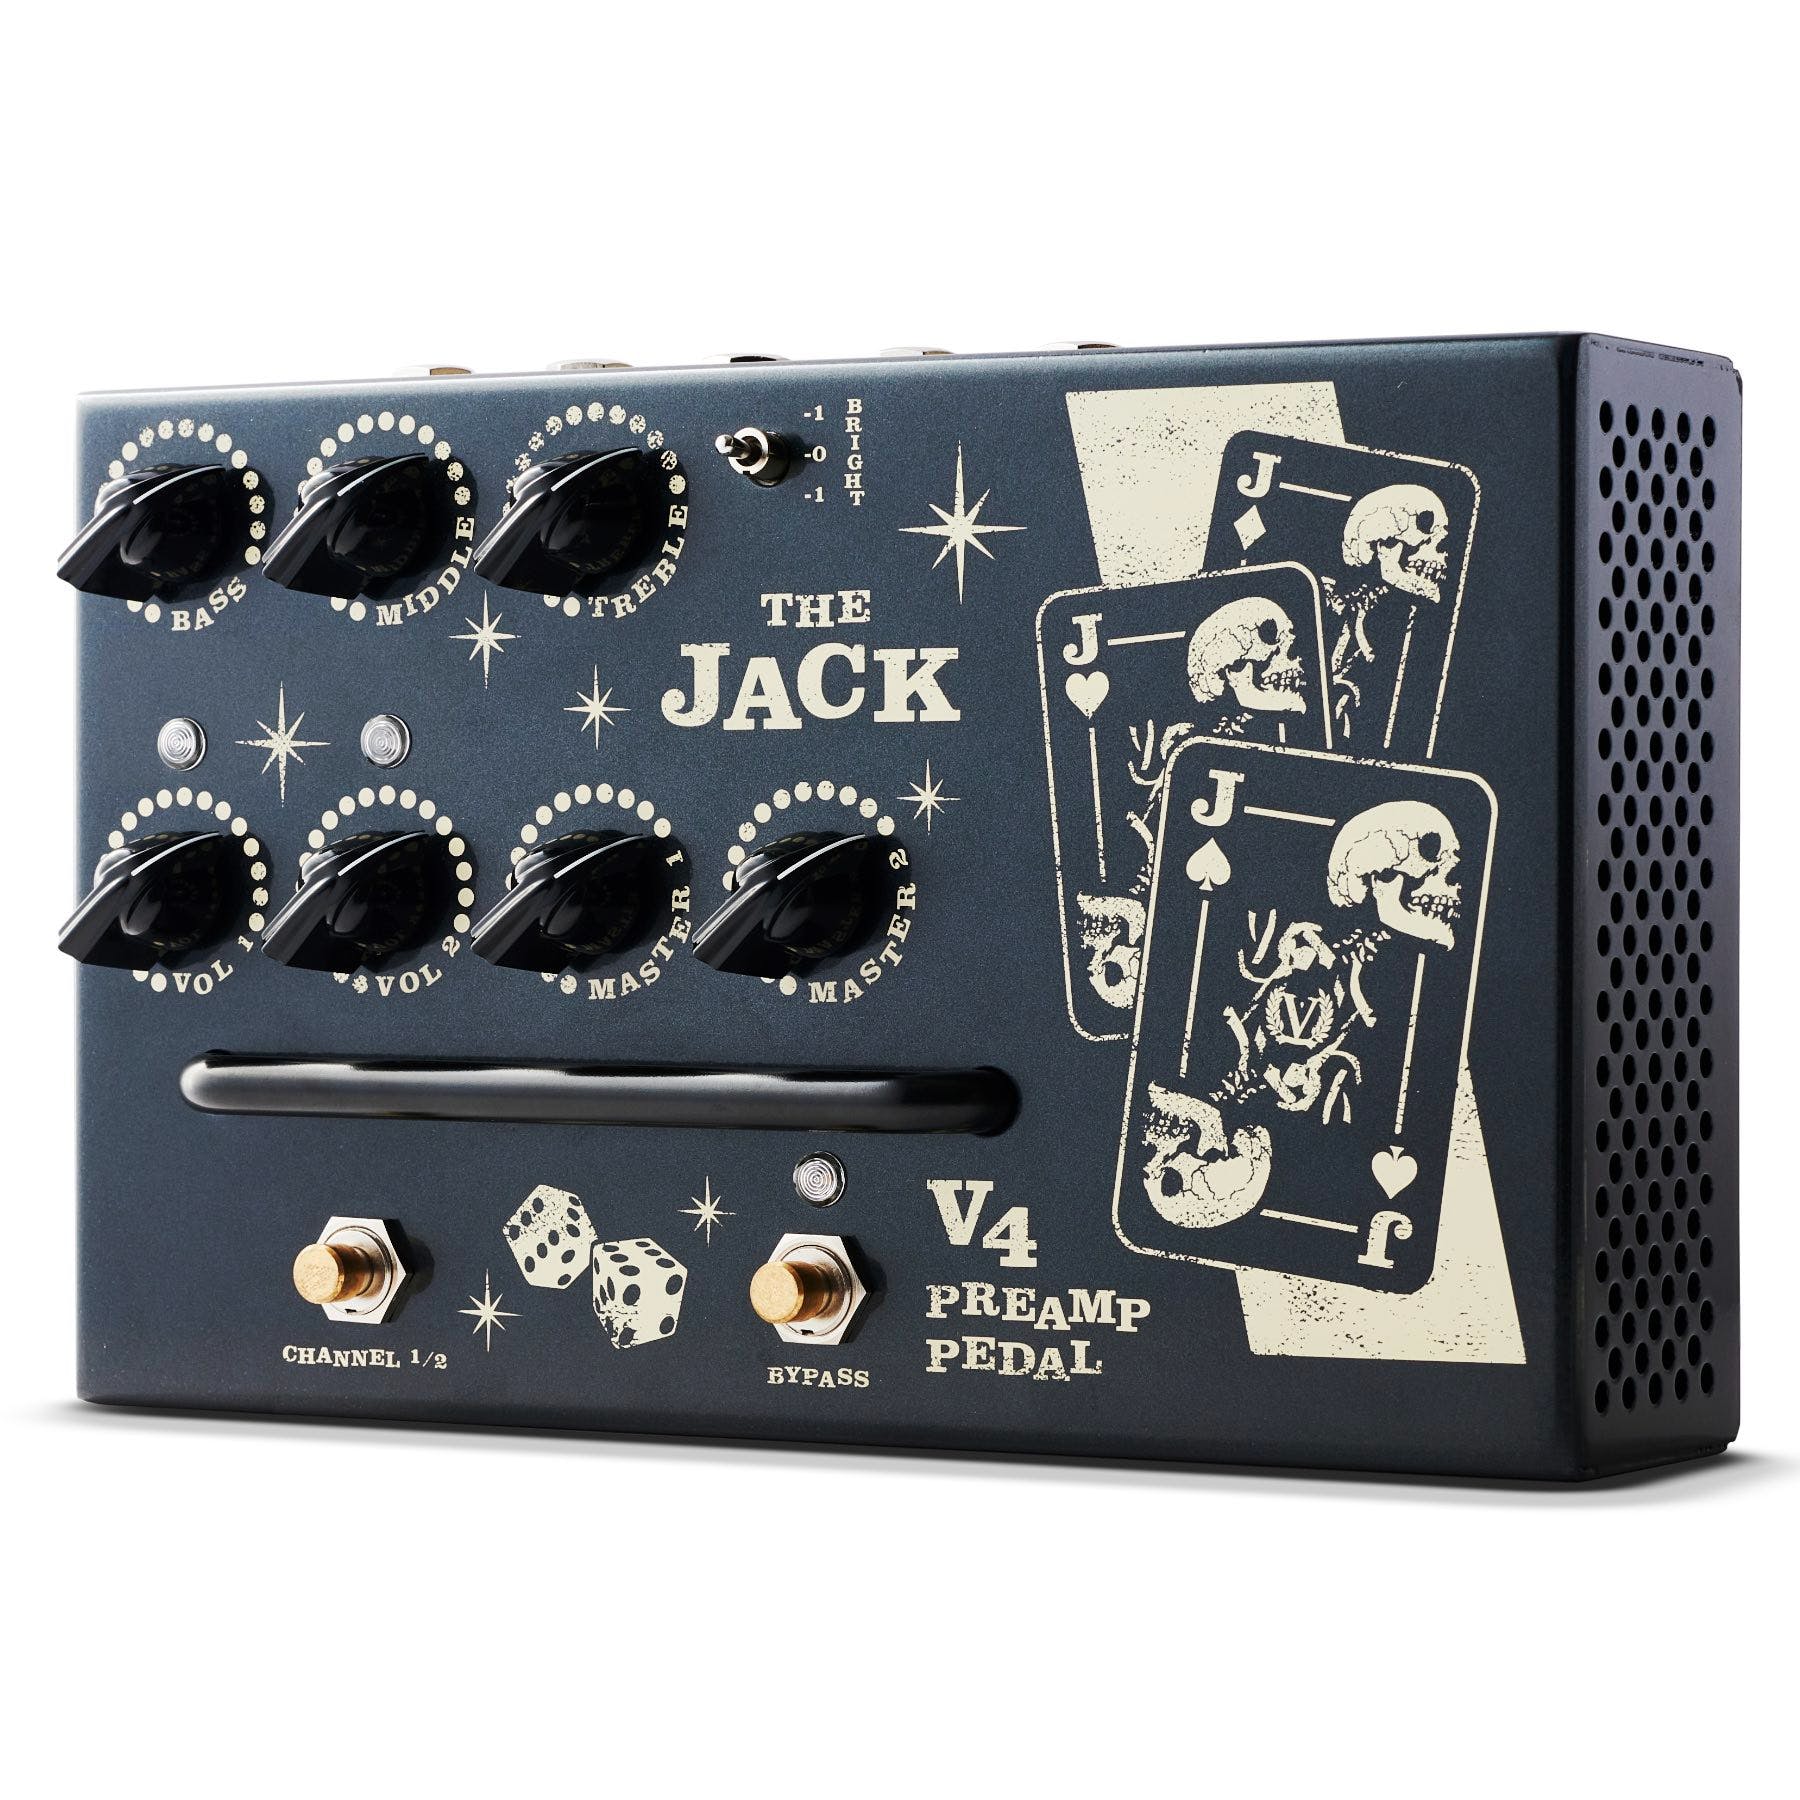 Victory Effects Victory V4 'the Jack' Preamp Pedal